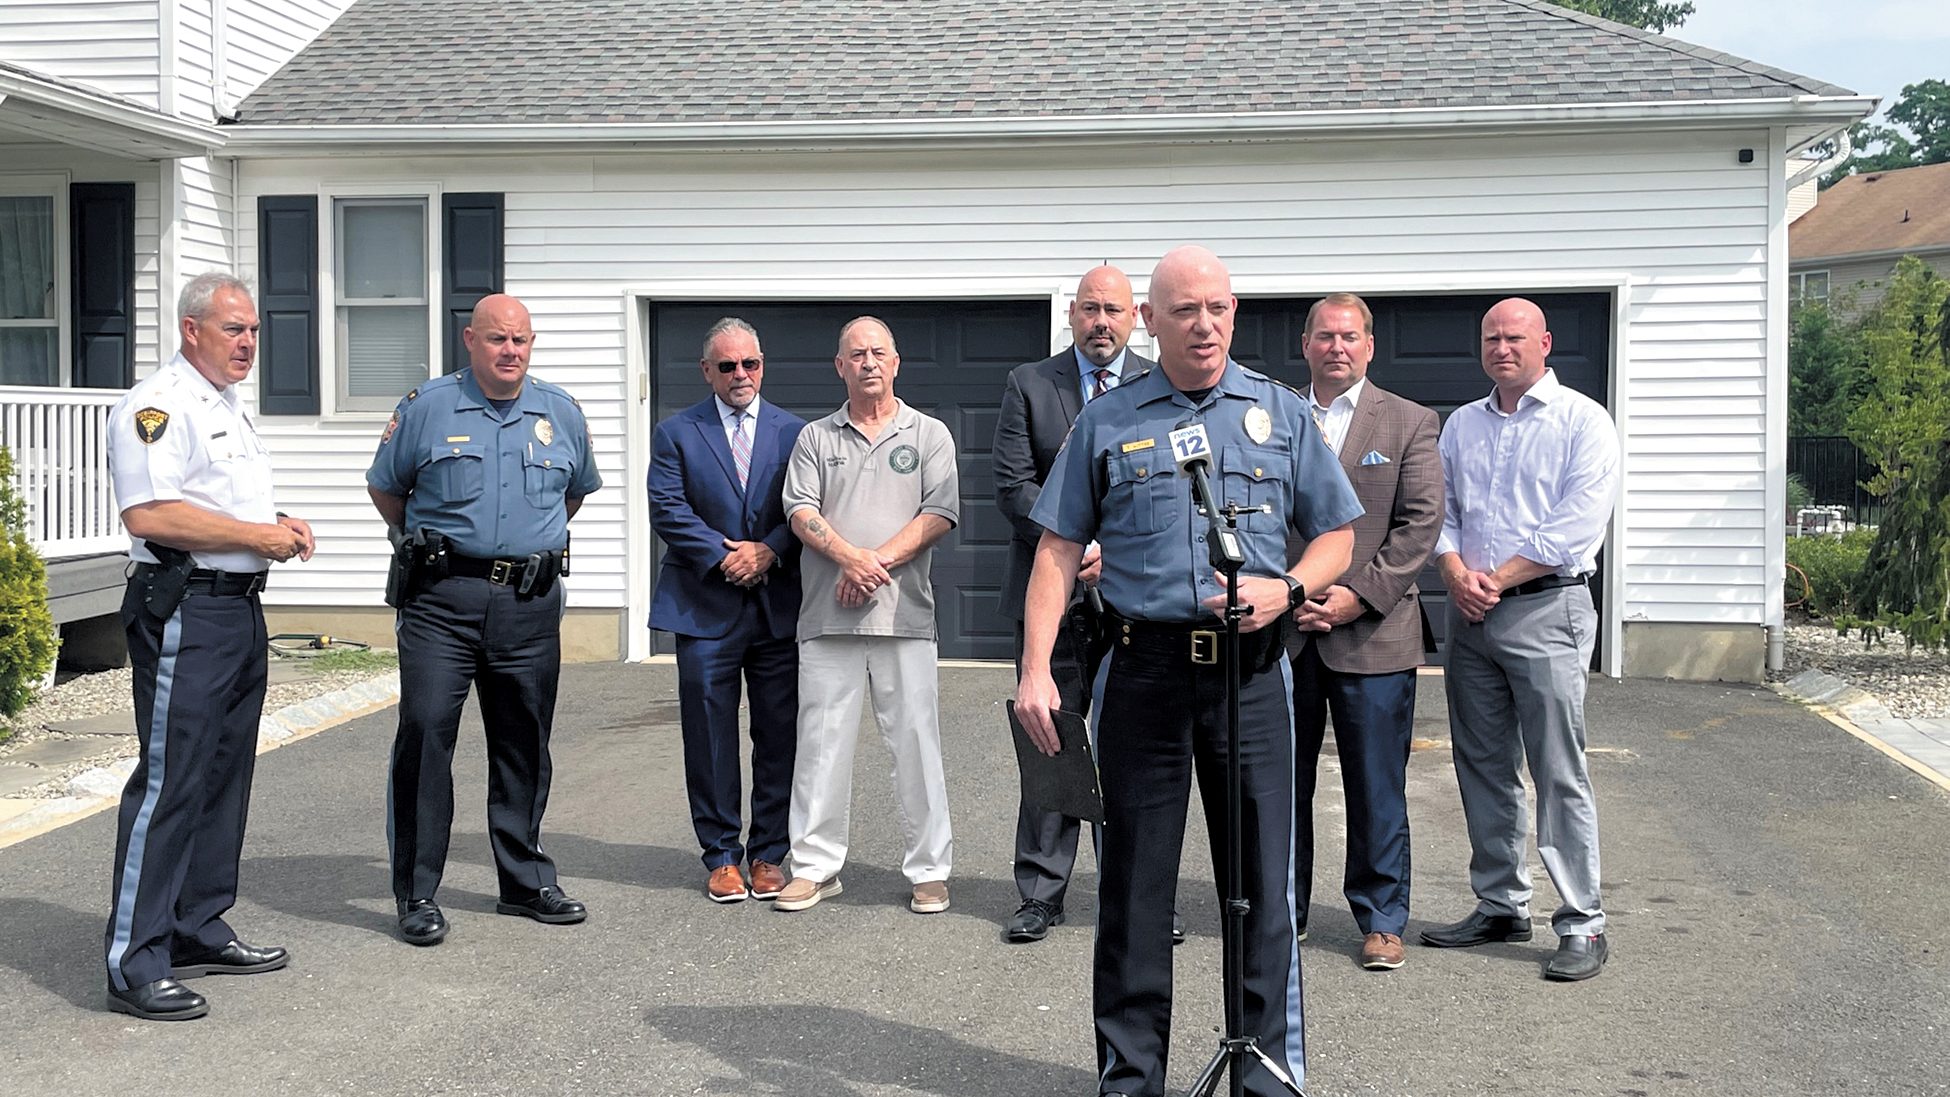 Joined by local and county law enforcement officials, Hazlet police chief Ted Wittke, front, launched the township’s home security survey program with a demonstration at one resident’s home. From left: Michael Kelly, Christopher Acevedo, John McCabe, Michael Sachs, Raymond Santiago, Shaun Golden and Rob Bengivenga. Stephen Appezzato